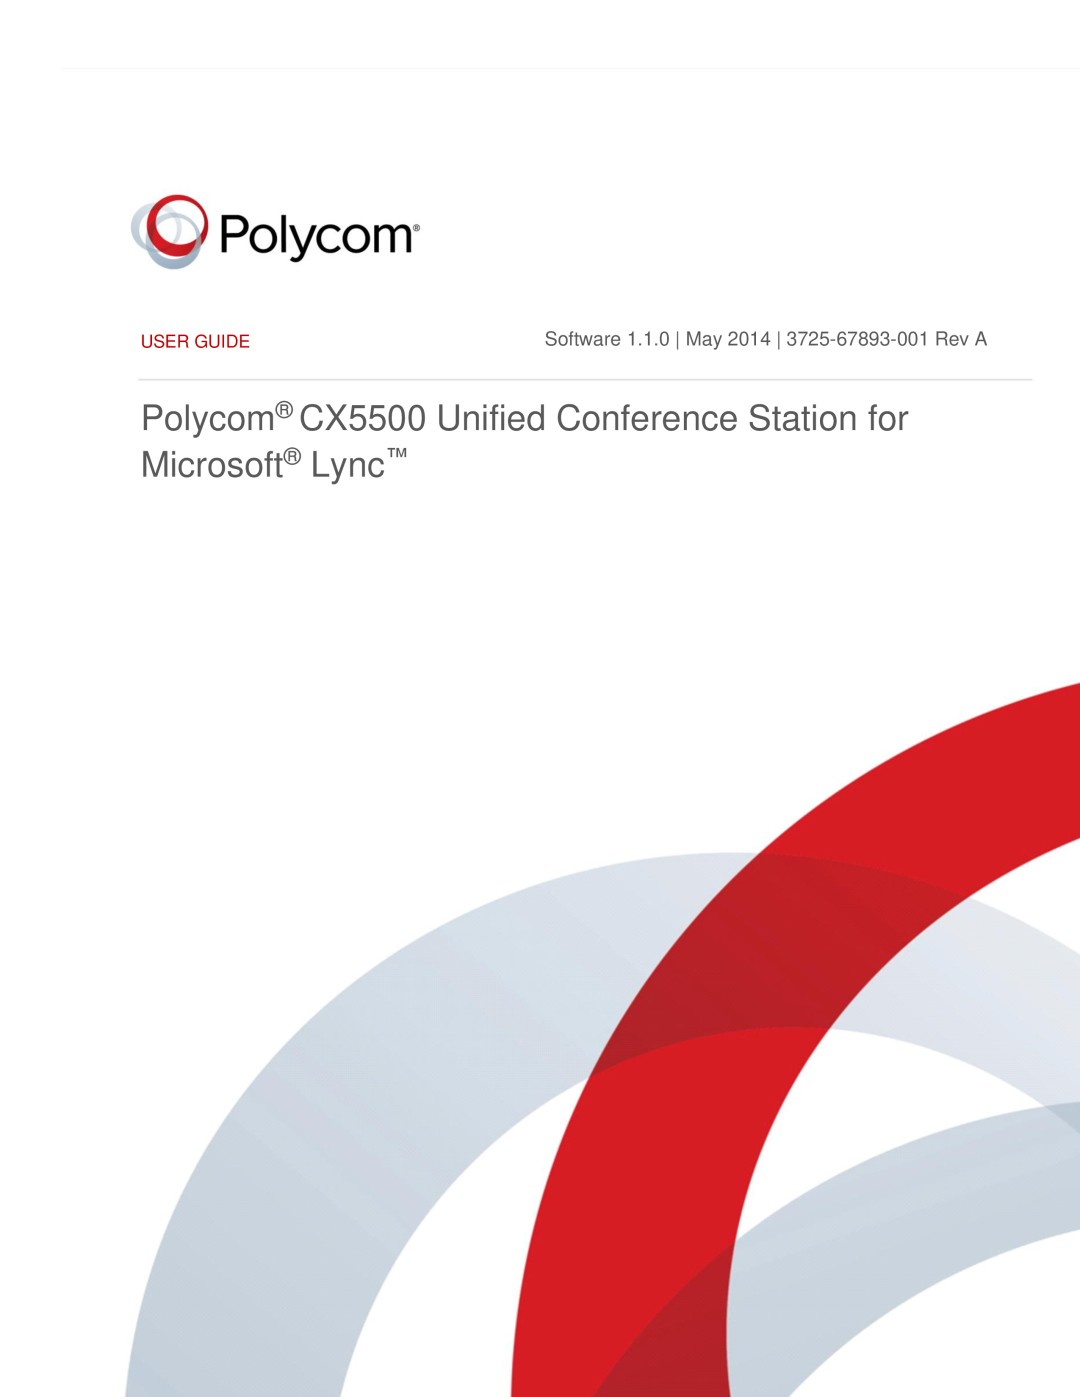 Polycom manual Polycom CX5500 Unified Conference Station for Microsoft Lync, User Guide 